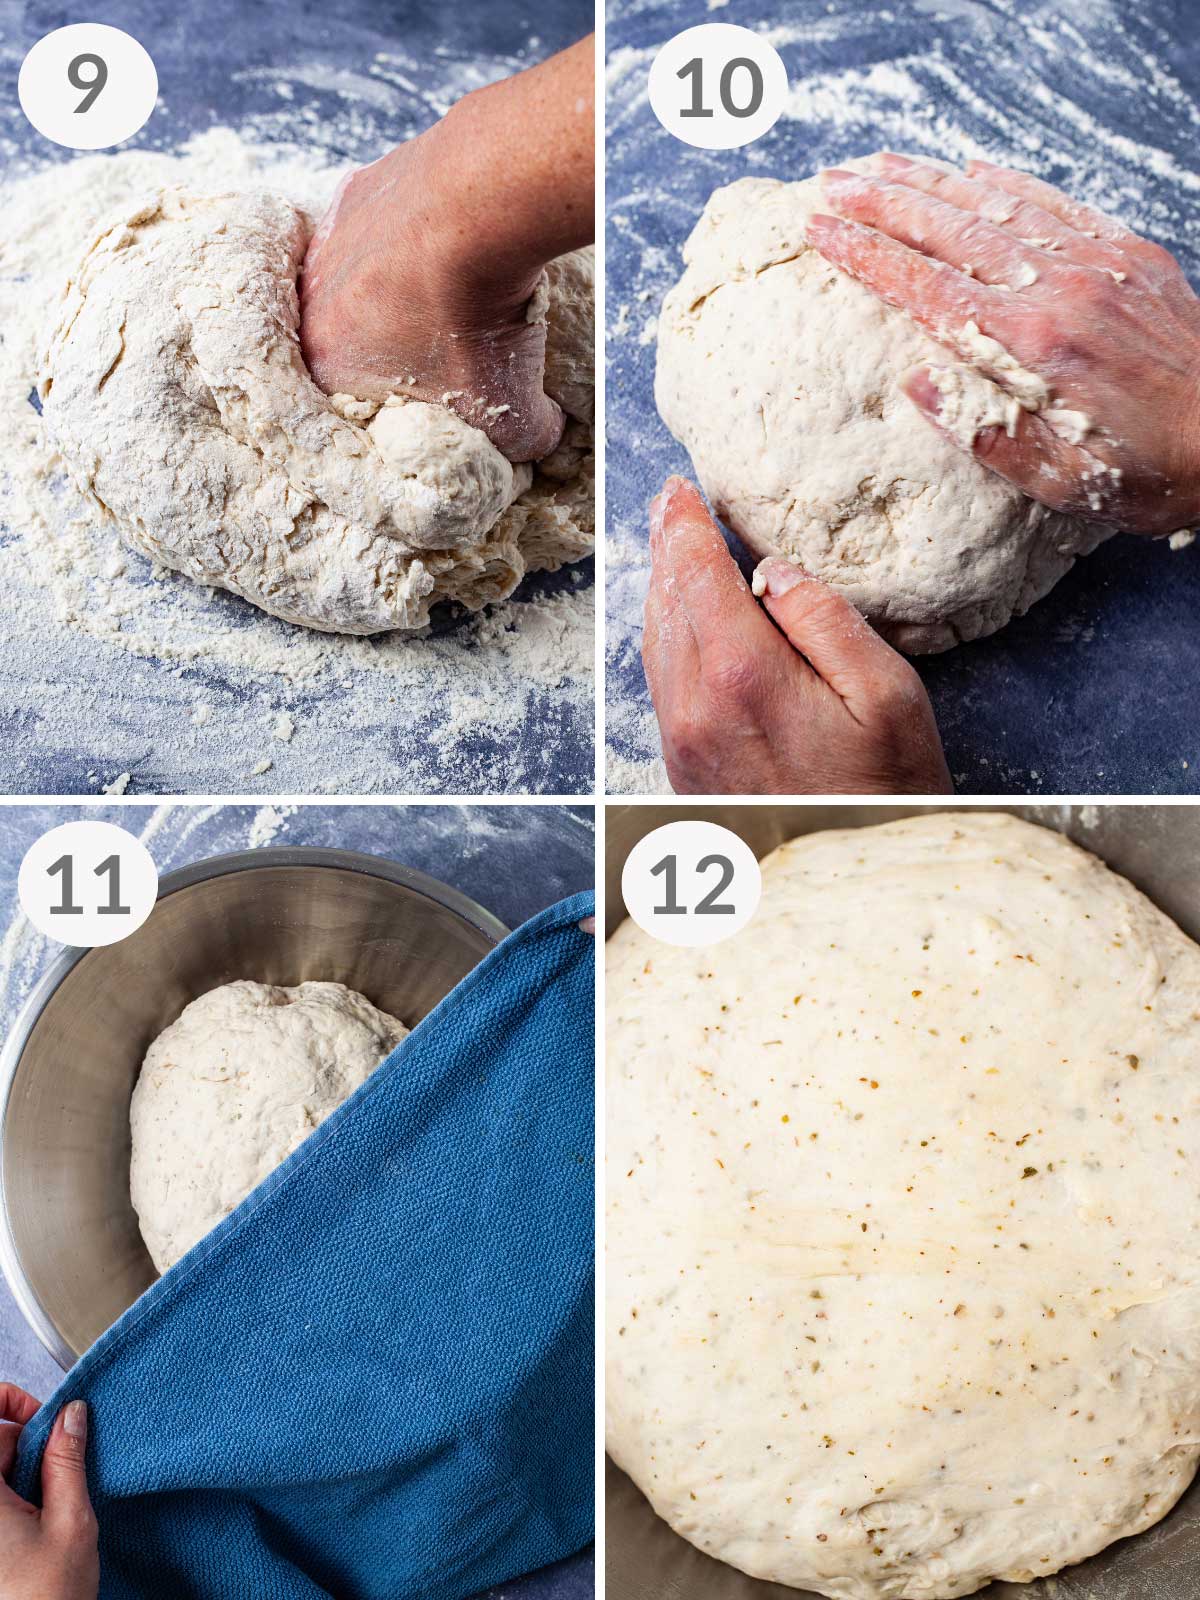 A series of steps showing how to knead pizza dough.